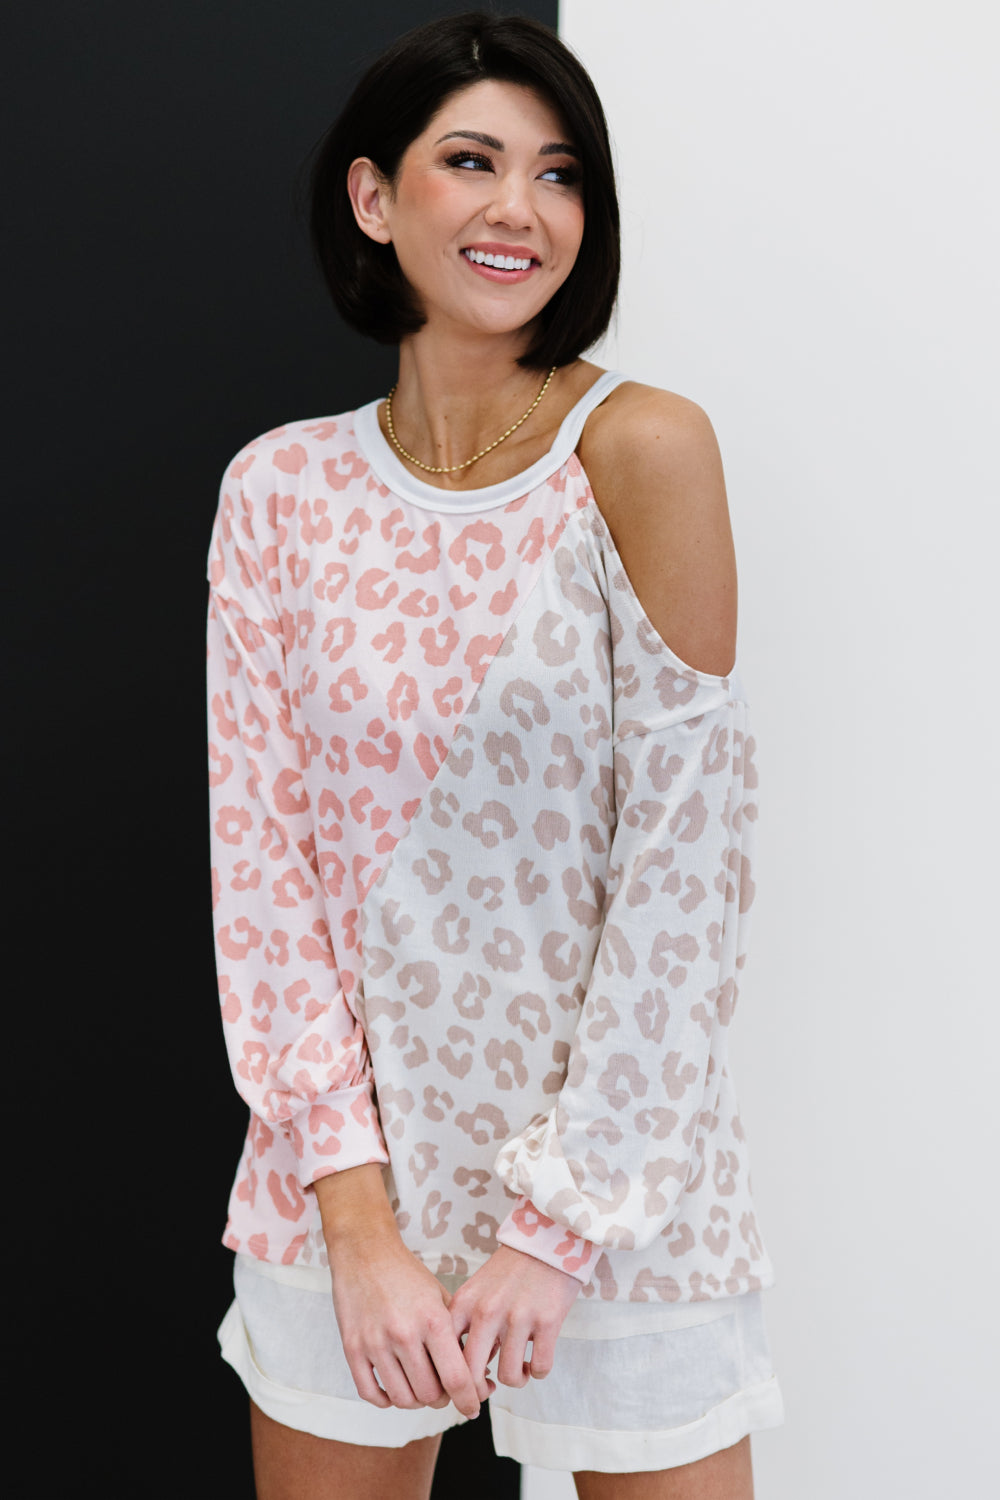 BiBi Just Wanna Have Fun Printed French Terry Top in Blush/Oatmeal